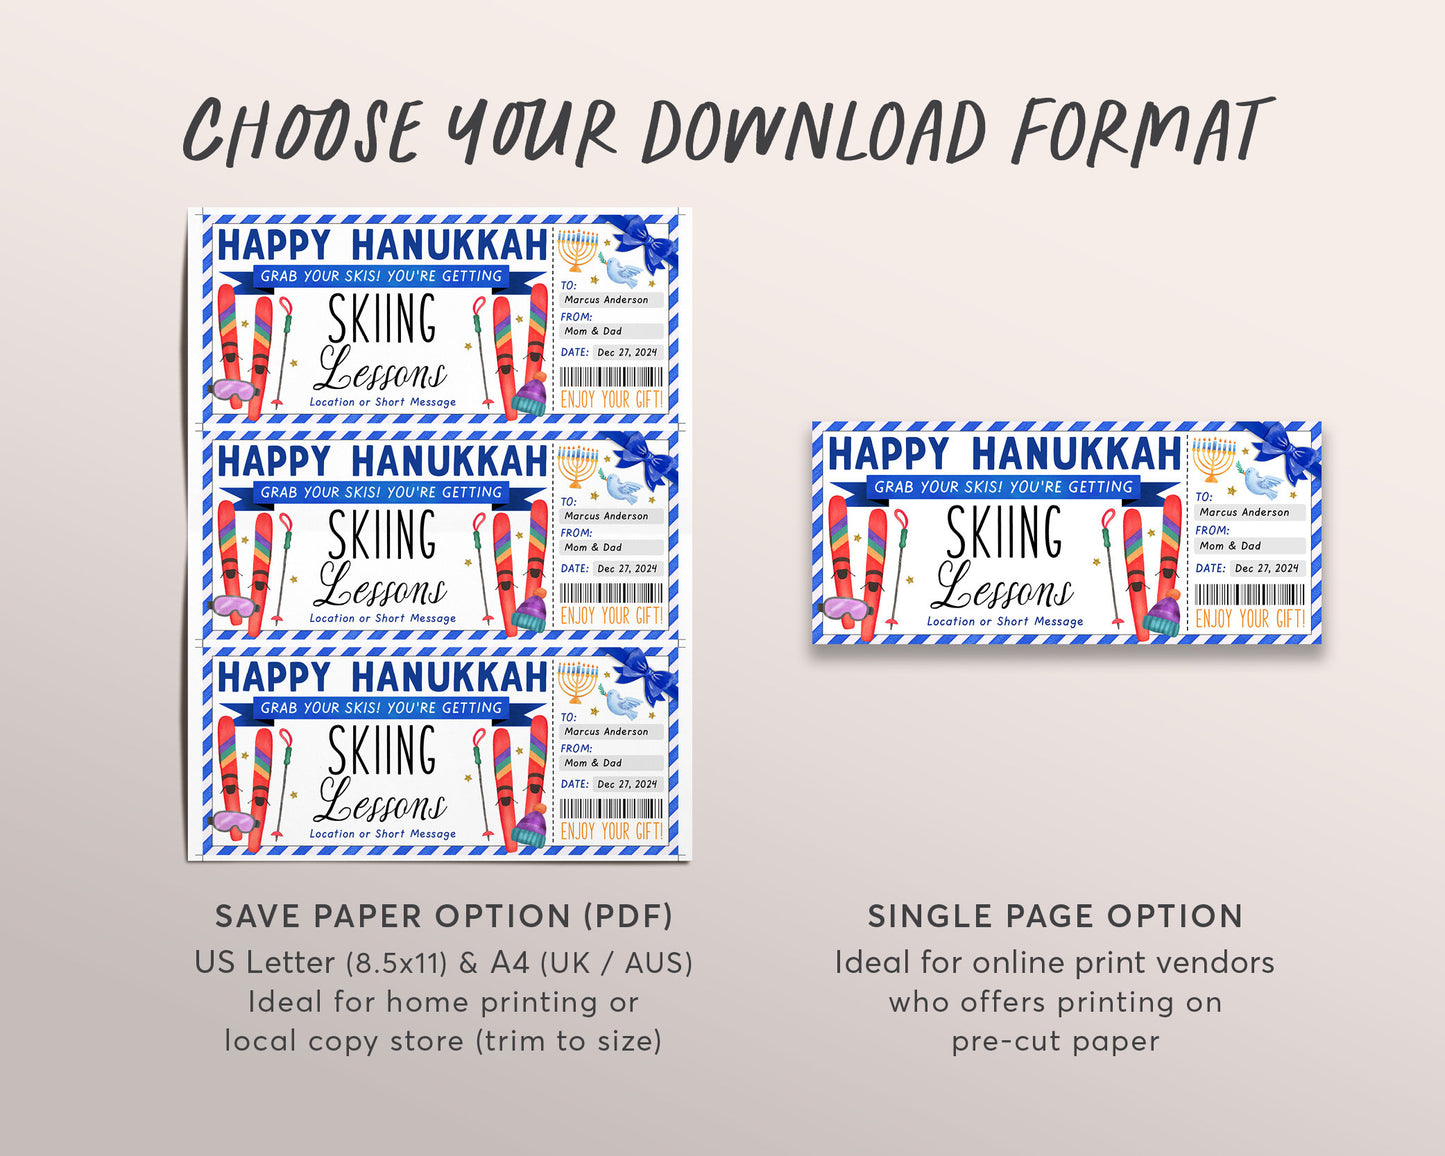 Hanukkah Skiing Lessons Voucher Gift Voucher Editable Template, Surprise Chanukah Ski Training Gift Certificate, Skiing Trip Vacation Coupon